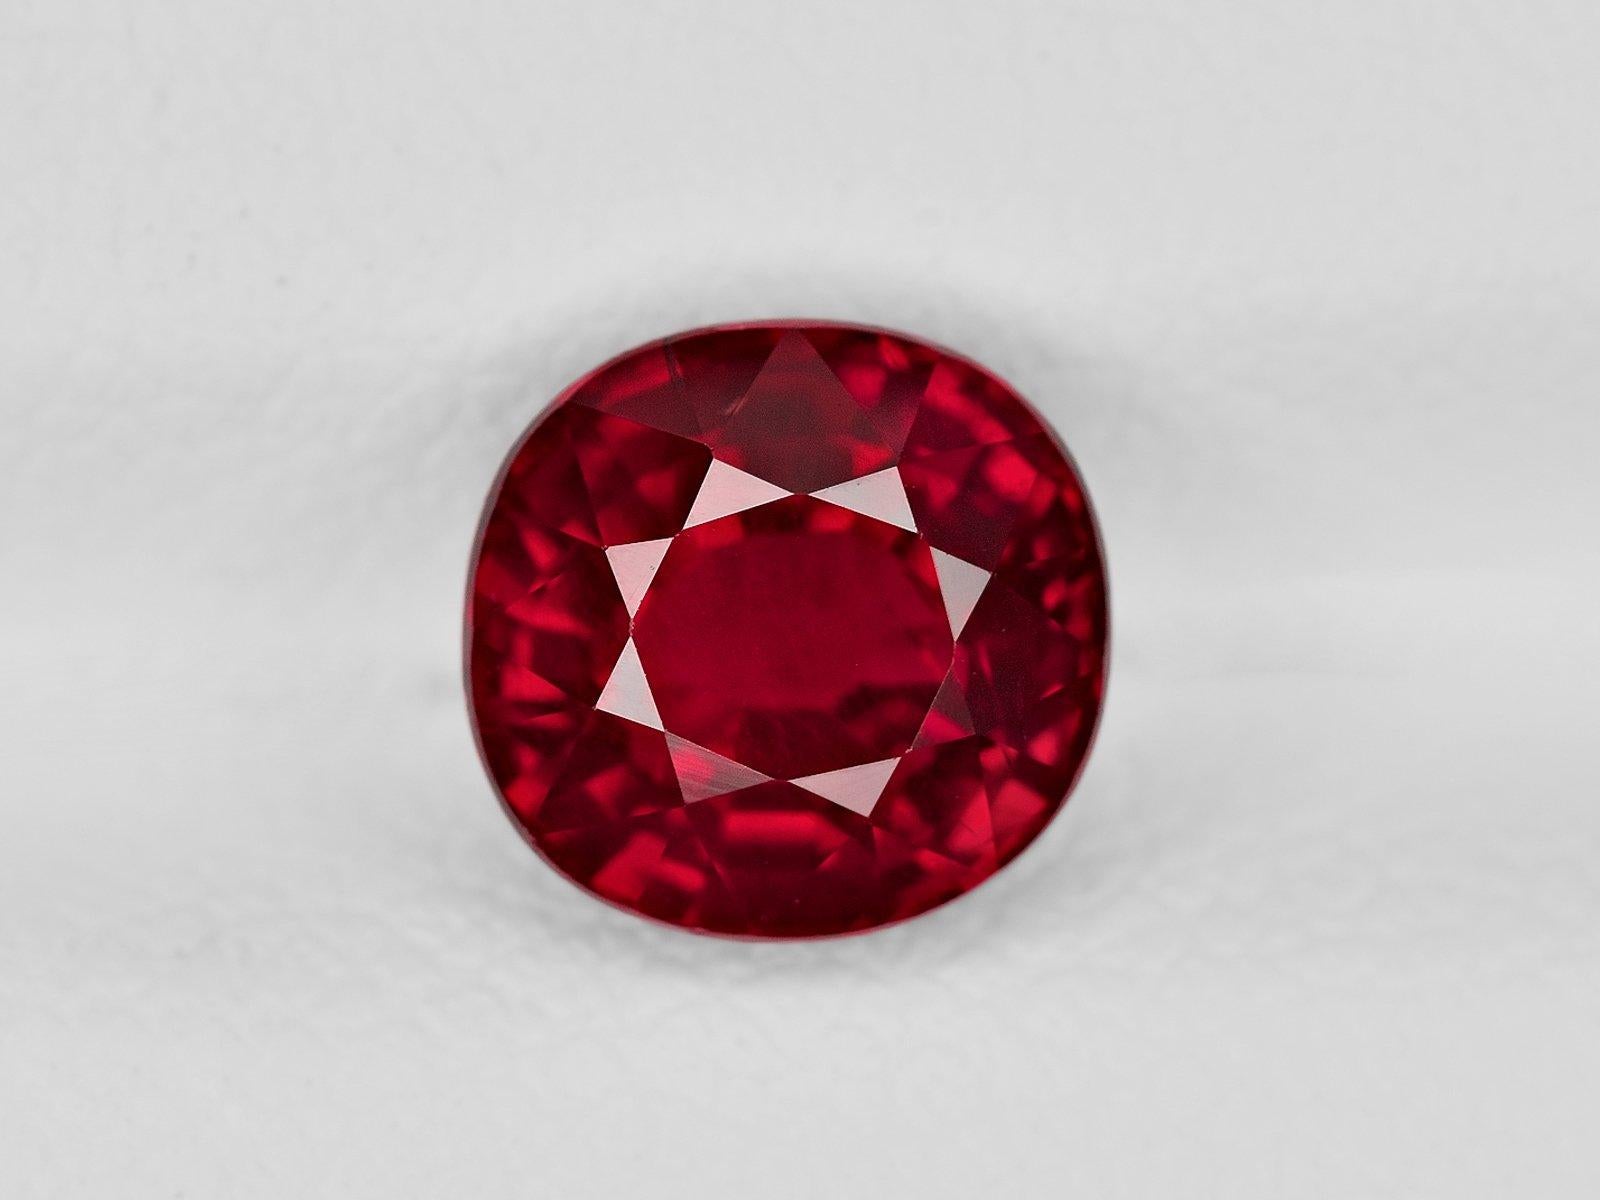 An amazing vivid fiery vivid pigeon blood red transparent  VS, Near Loupe-Clean natural no heat ruby ring mined in Mozambique with two natural trillion cut diamonds at each side set in Platinum.
Rubies with this vs clarity amazing color and natural